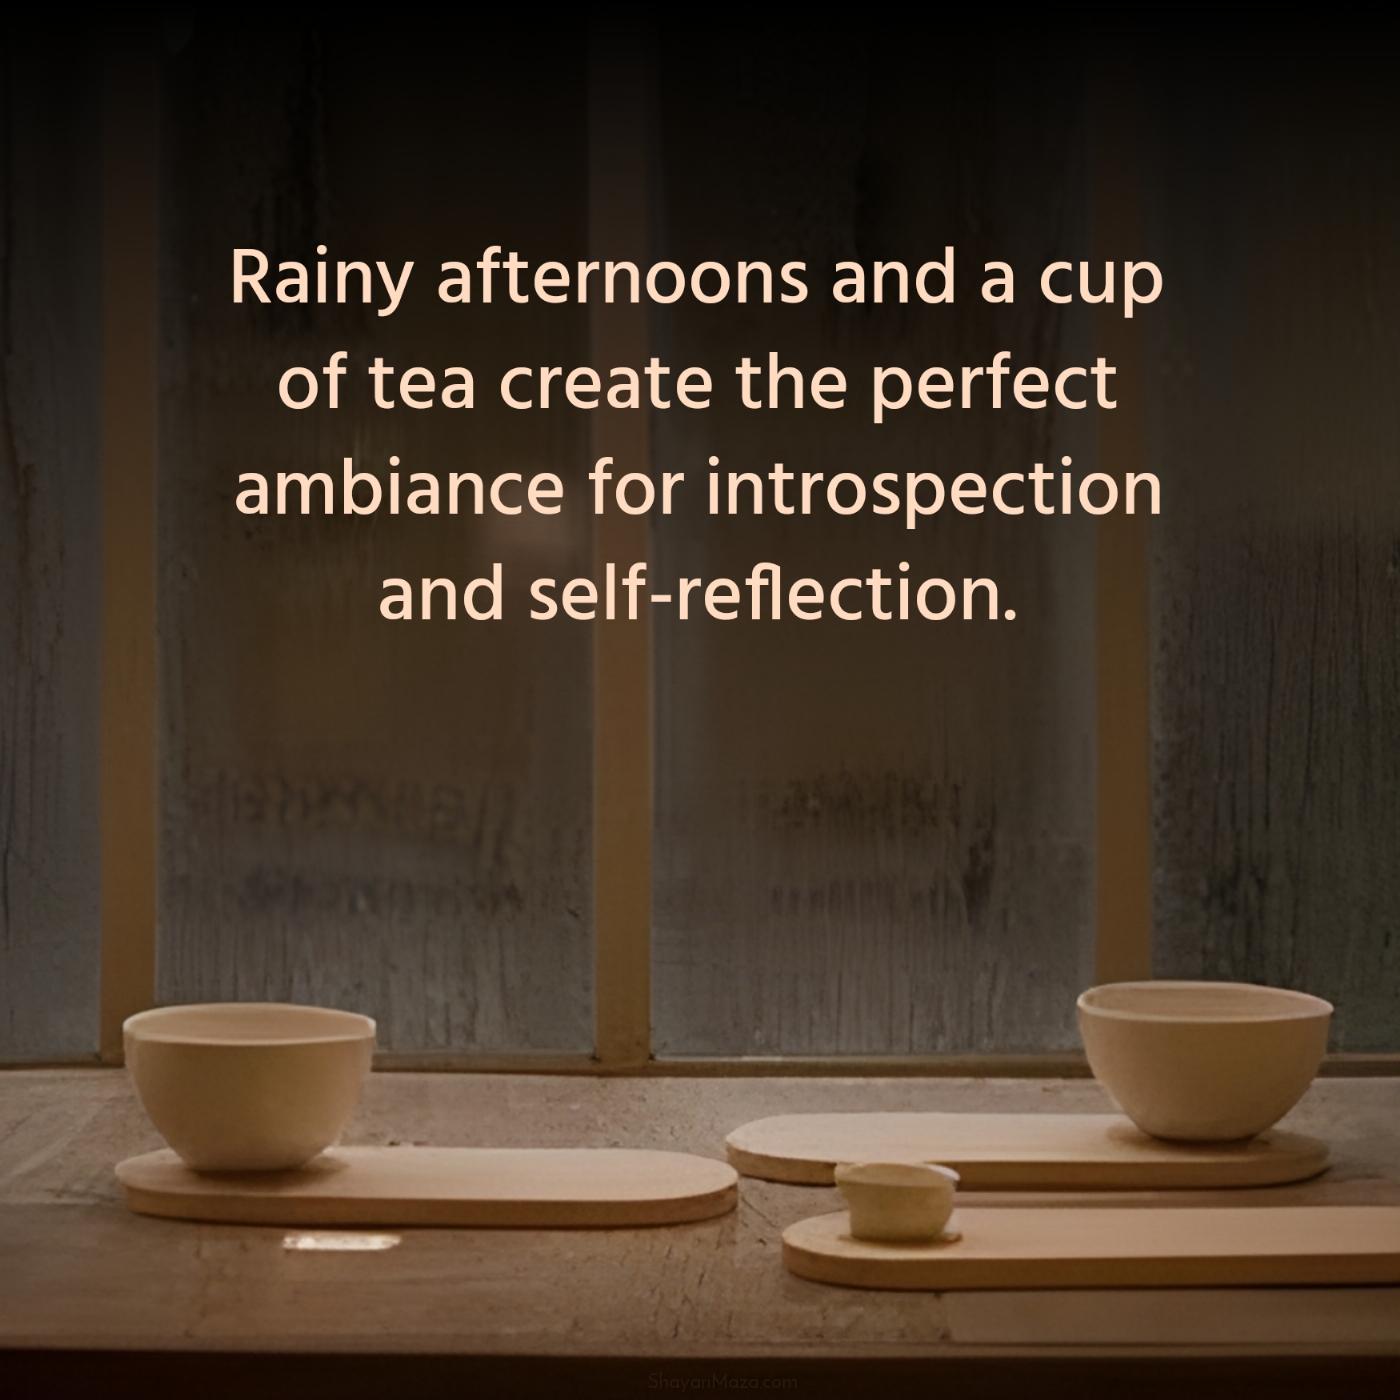 Rainy afternoons and a cup of tea create the perfect ambiance